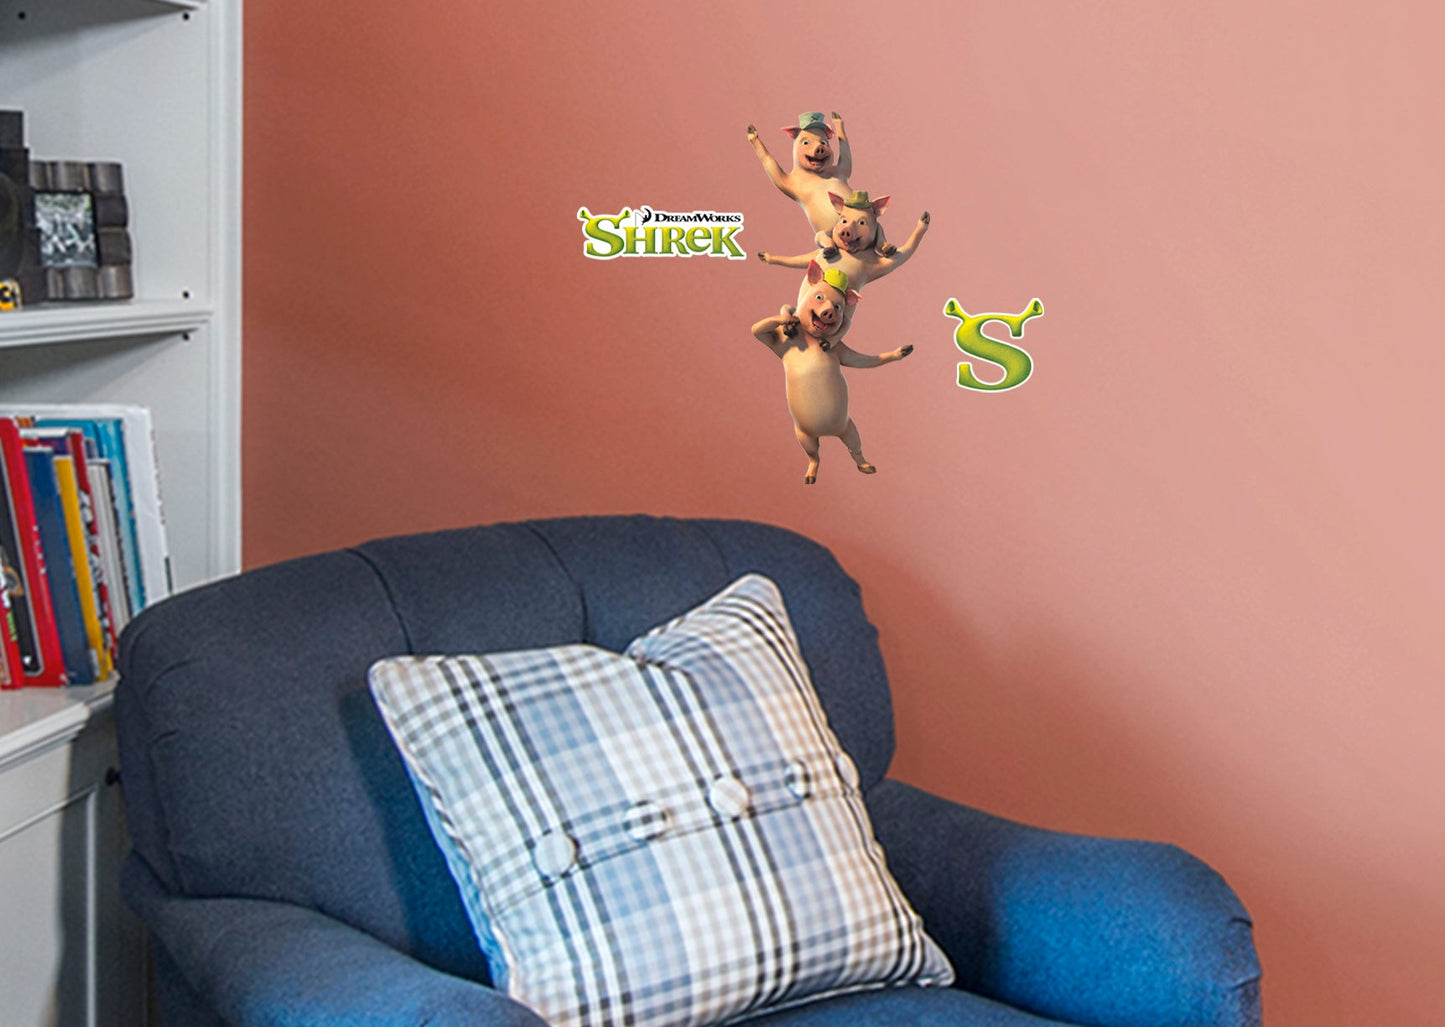 Shrek: Three Pigs RealBig - Officially Licensed NBC Universal Removable Adhesive Decal